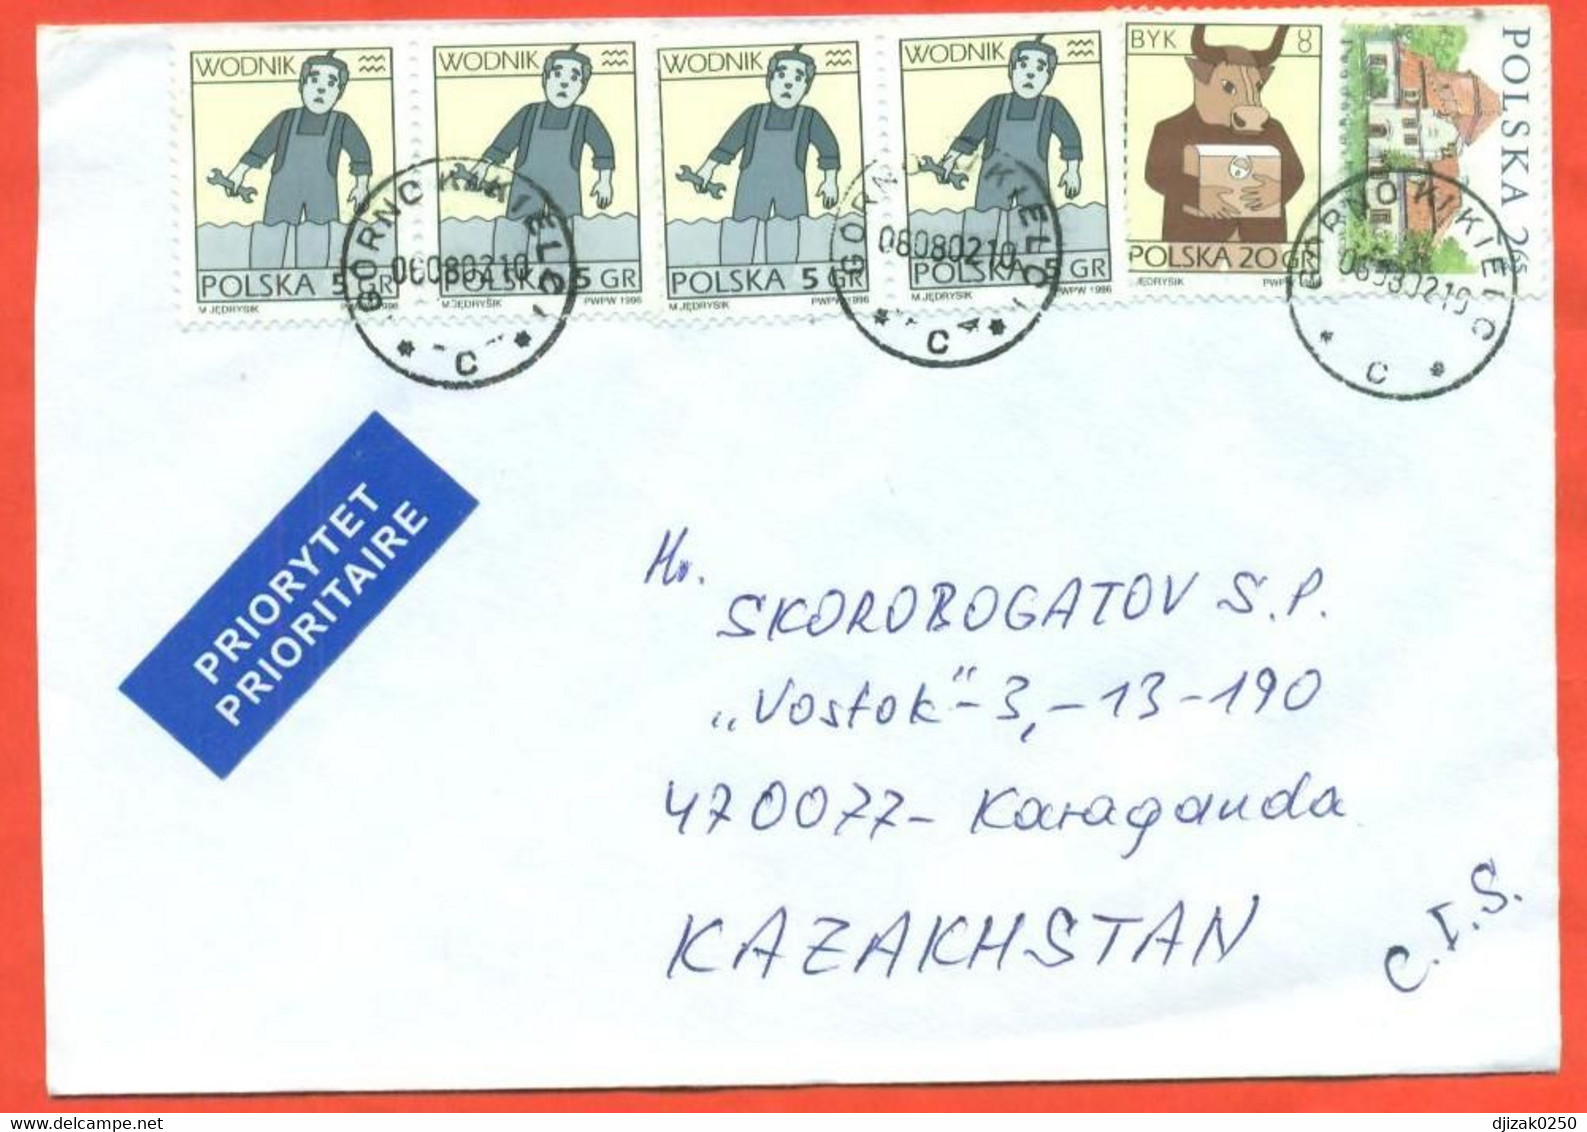 Poland 2002. The Envelope  Passed Through The Mail. Airmail. - Covers & Documents